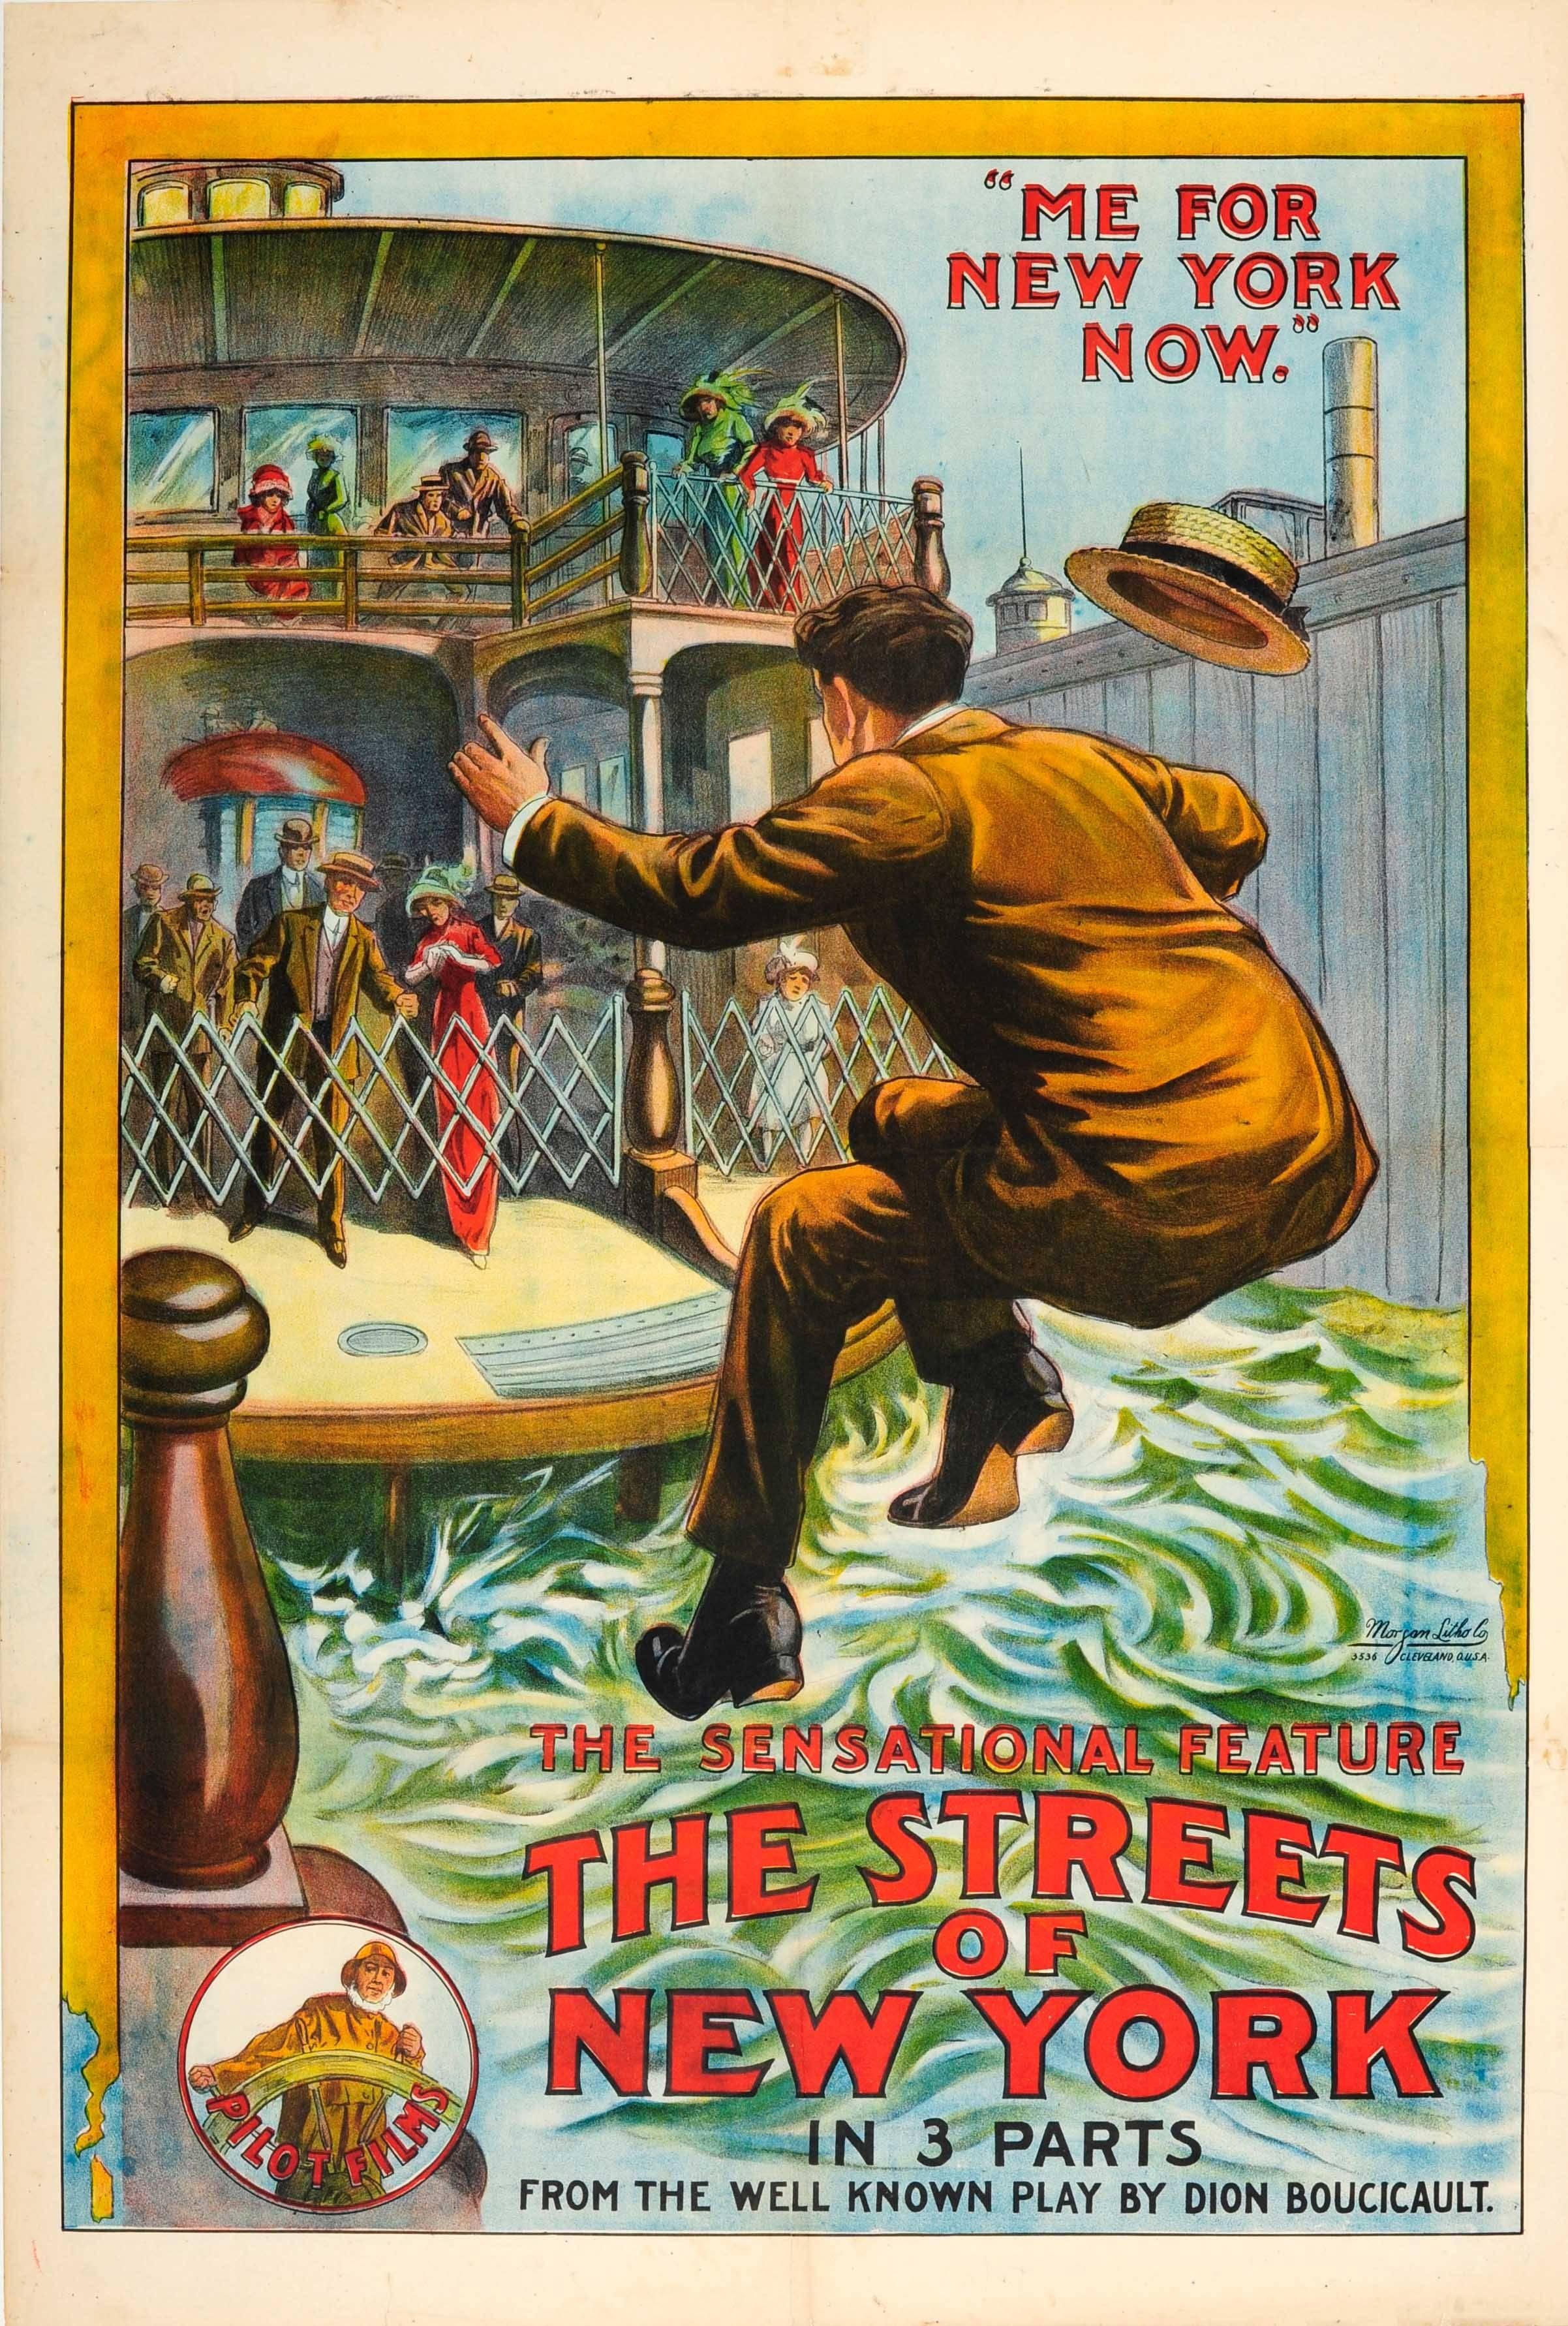 Unknown Print - Original Comedy Movie Poster - The Streets Of New York - Play By Dion Boucicault